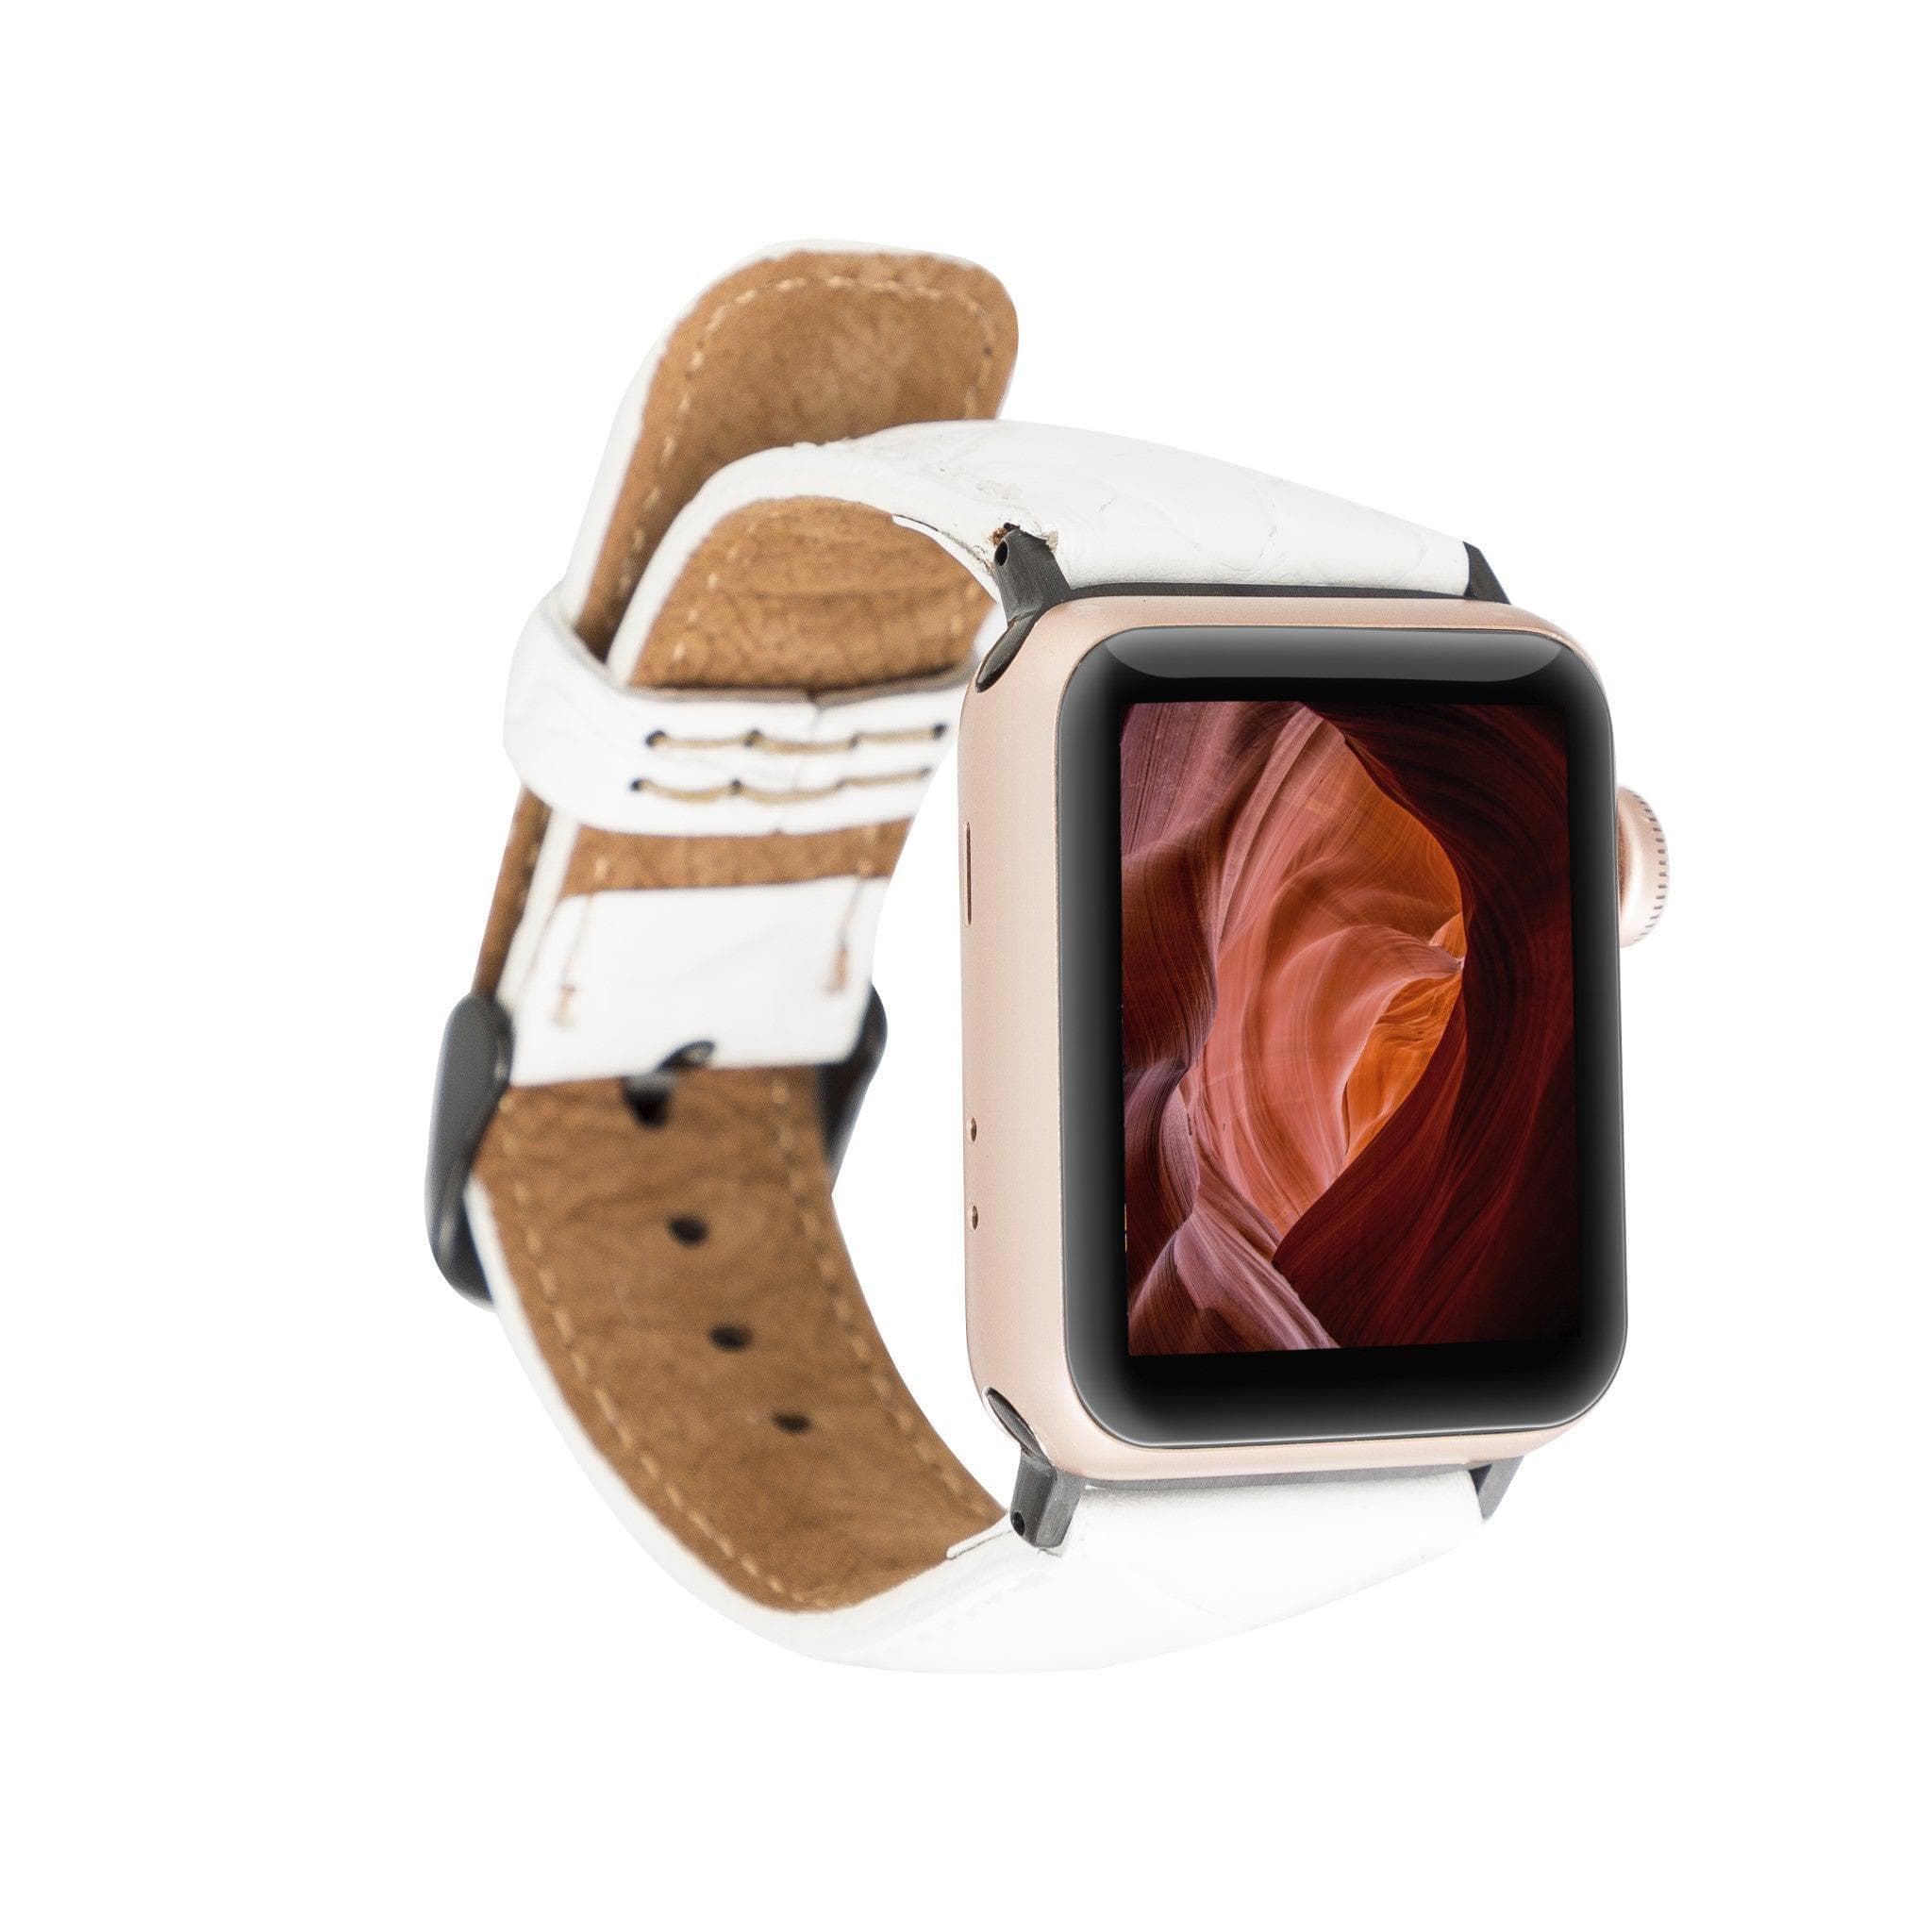 Hereford Classic Colorful Apple Watch Leather Straps Bouletta LTD